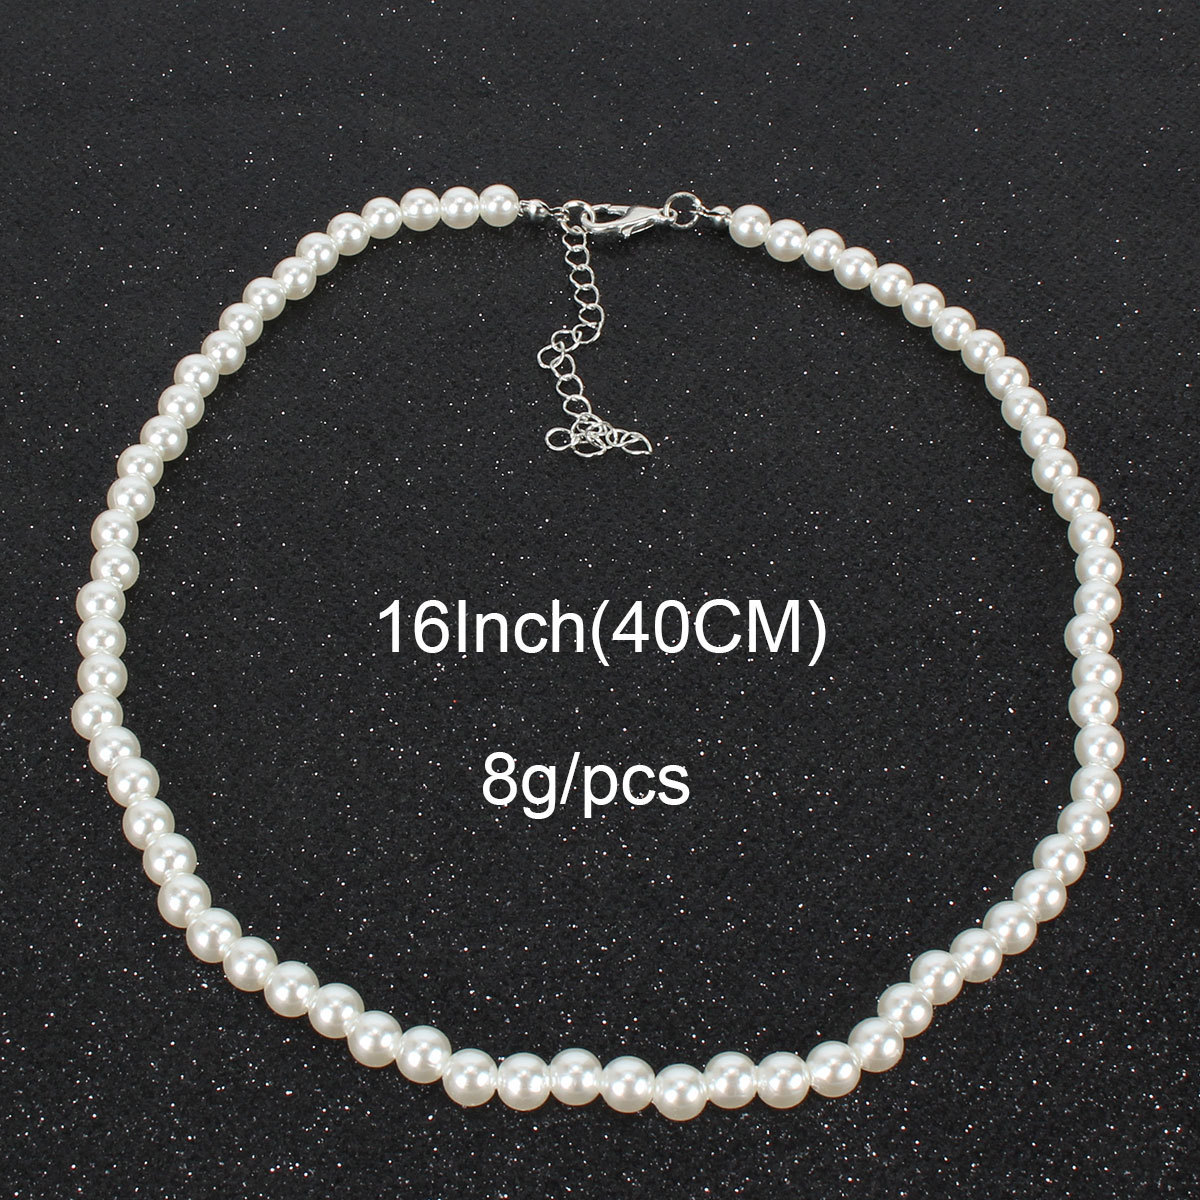 Fashionable And Versatile Near Round Imitation Pearl Necklace Neck Chain Female Clavicle Chain-2